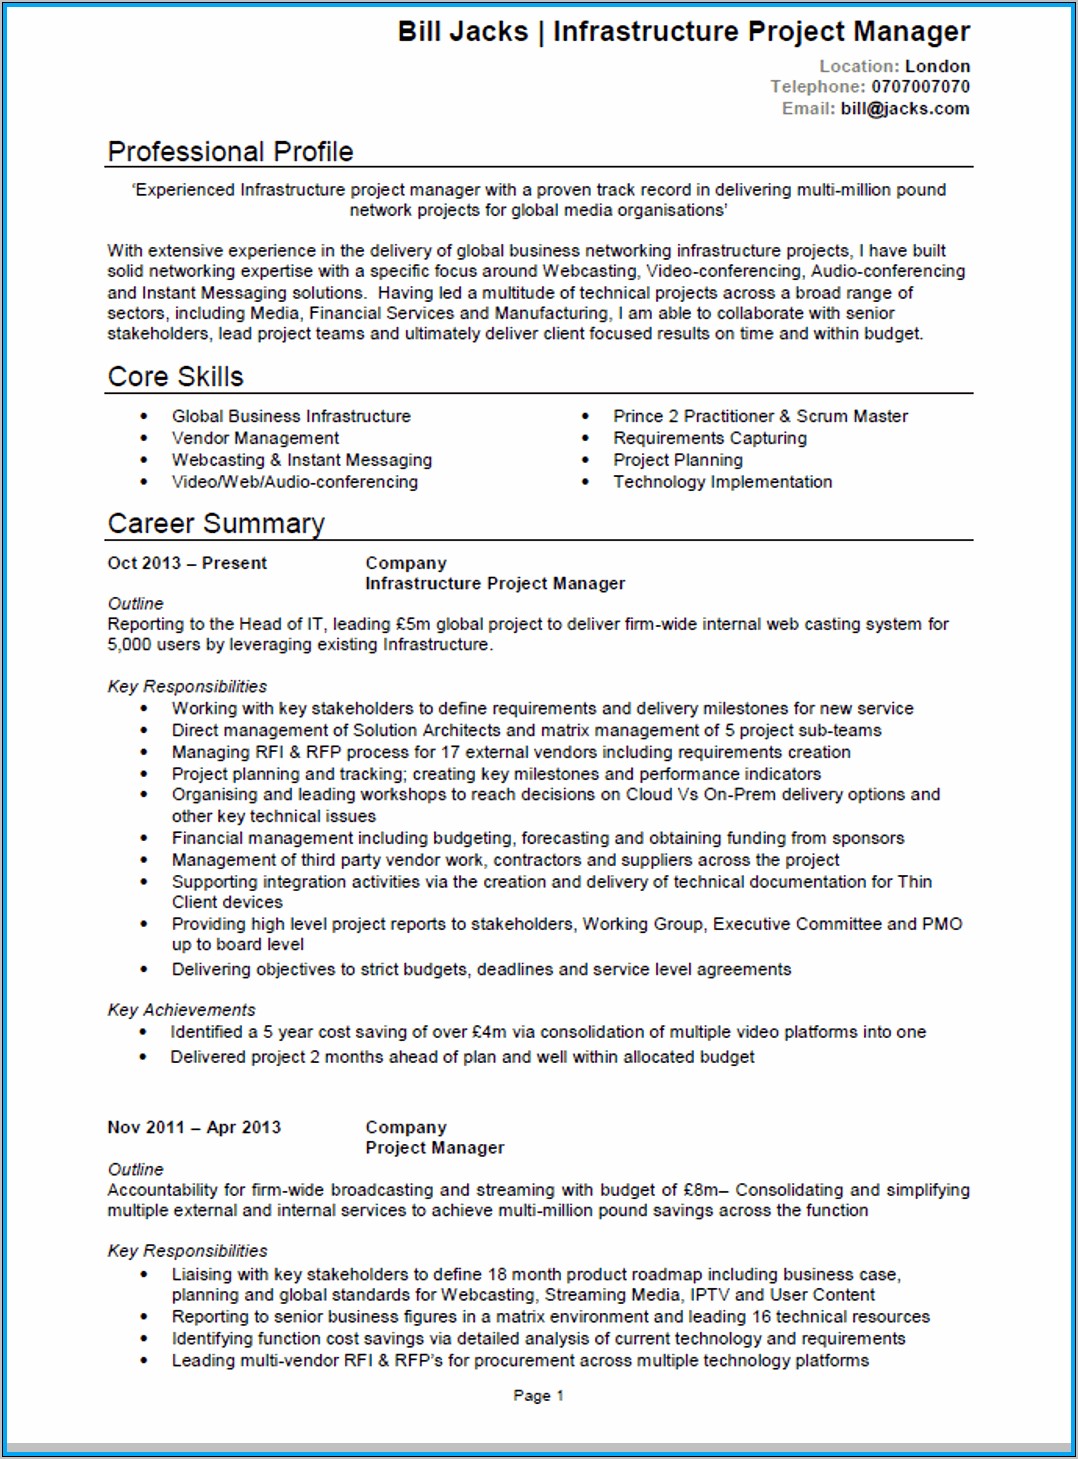 Include Course And Project Experience In Resume